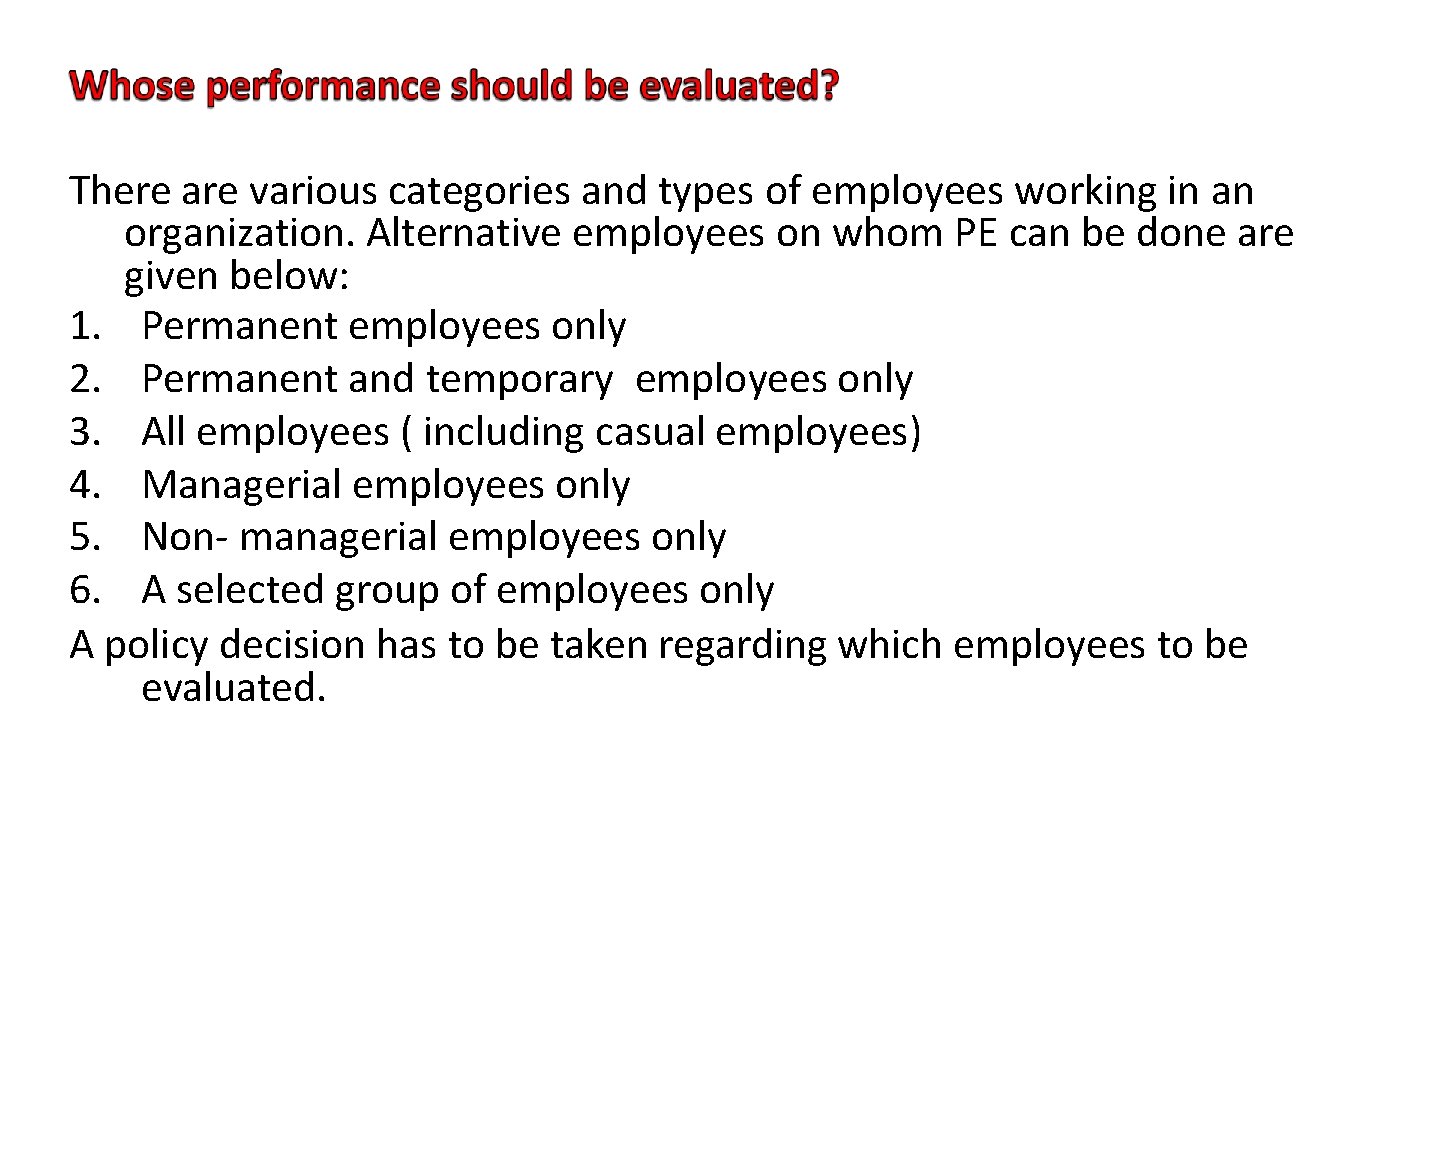 There are various categories and types of employees working in an organization. Alternative employees